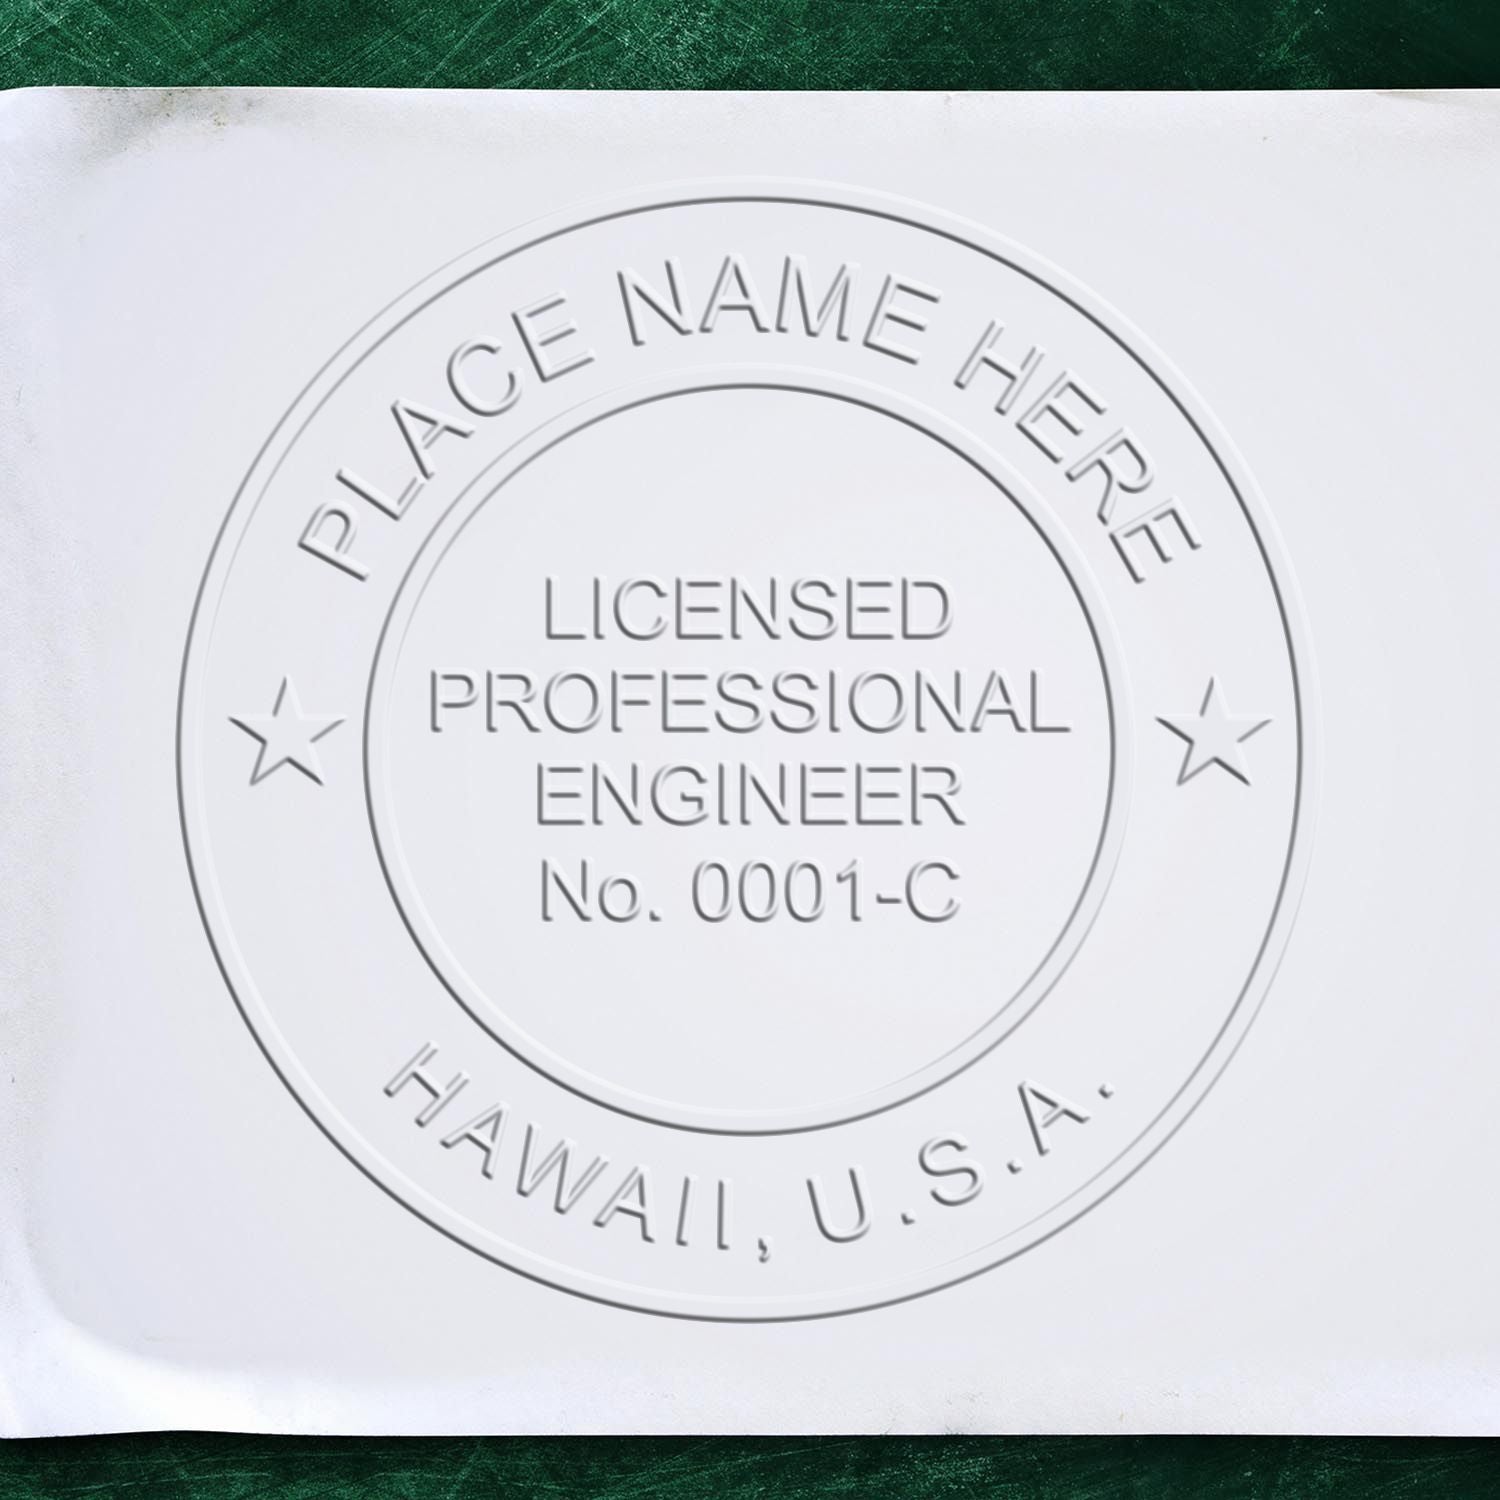 An alternative view of the Heavy Duty Cast Iron Hawaii Engineer Seal Embosser stamped on a sheet of paper showing the image in use